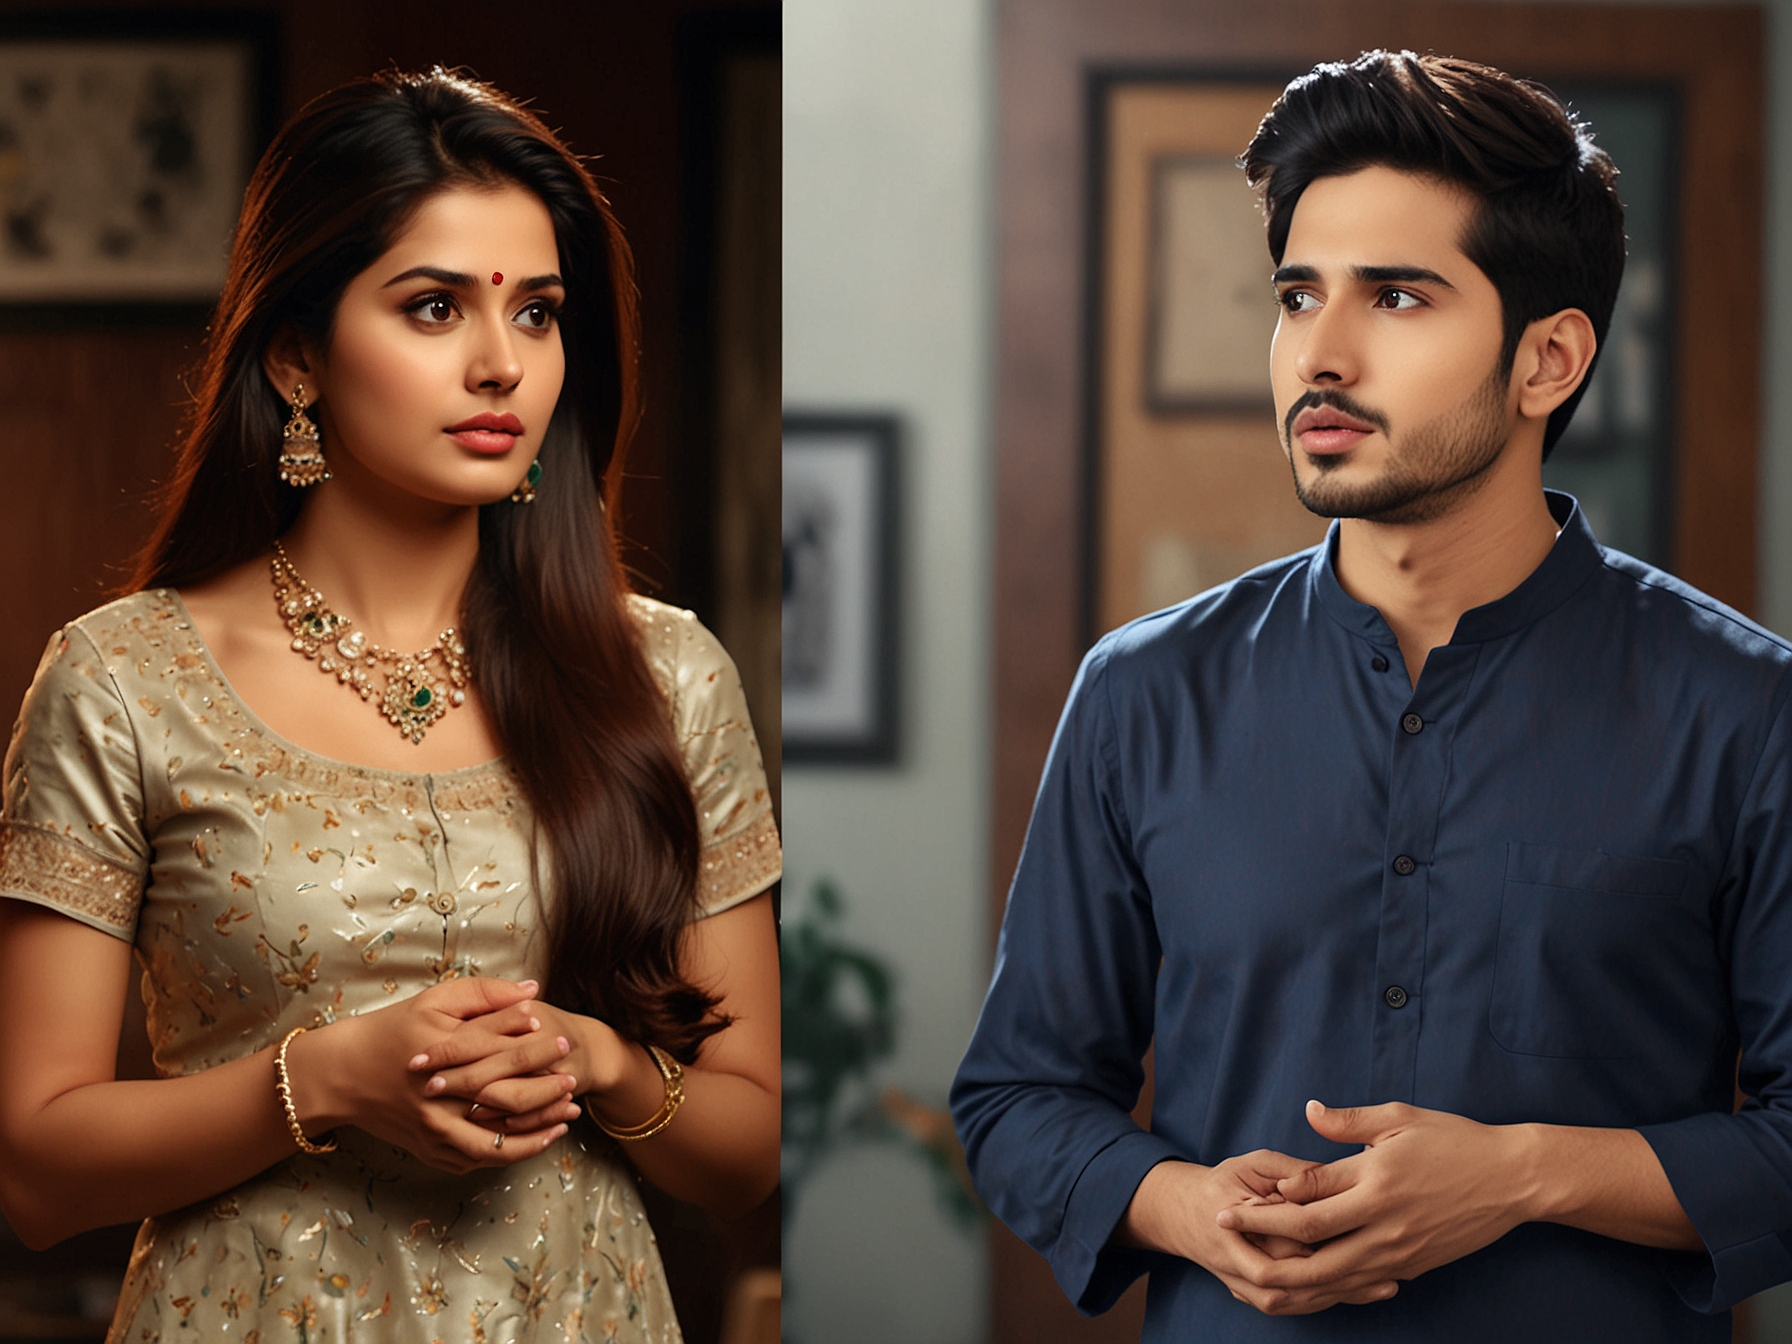 A split-screen image showing Payal Malik asserting her legal marriage to Armaan Malik on one side, and on the other, a puzzled Kritika Malik with a worried expression.